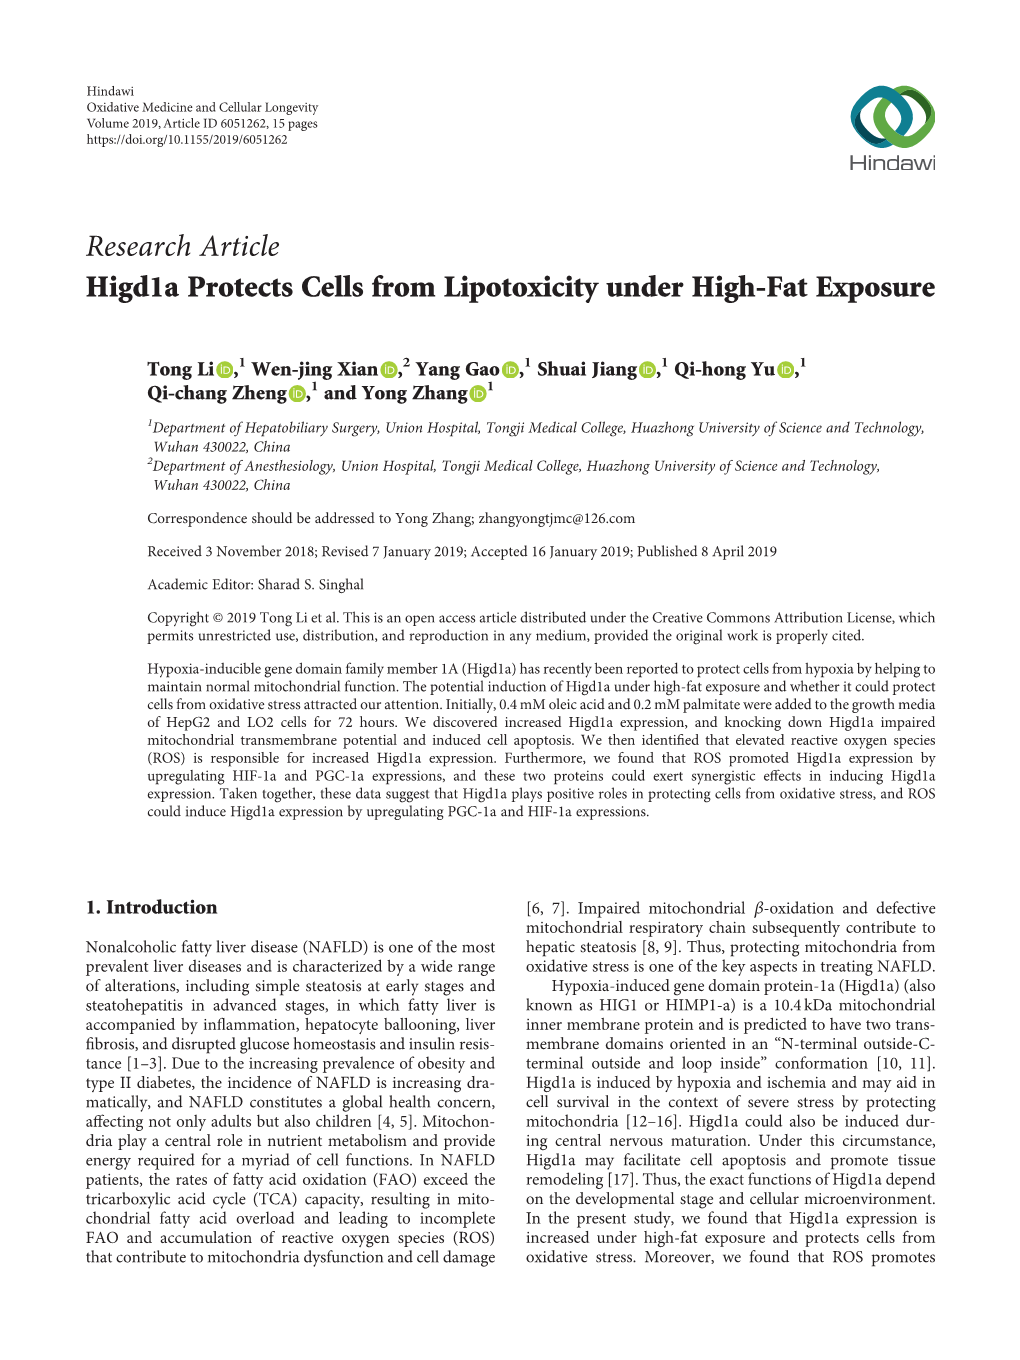 Research Article Higd1a Protects Cells from Lipotoxicity Under High-Fat Exposure